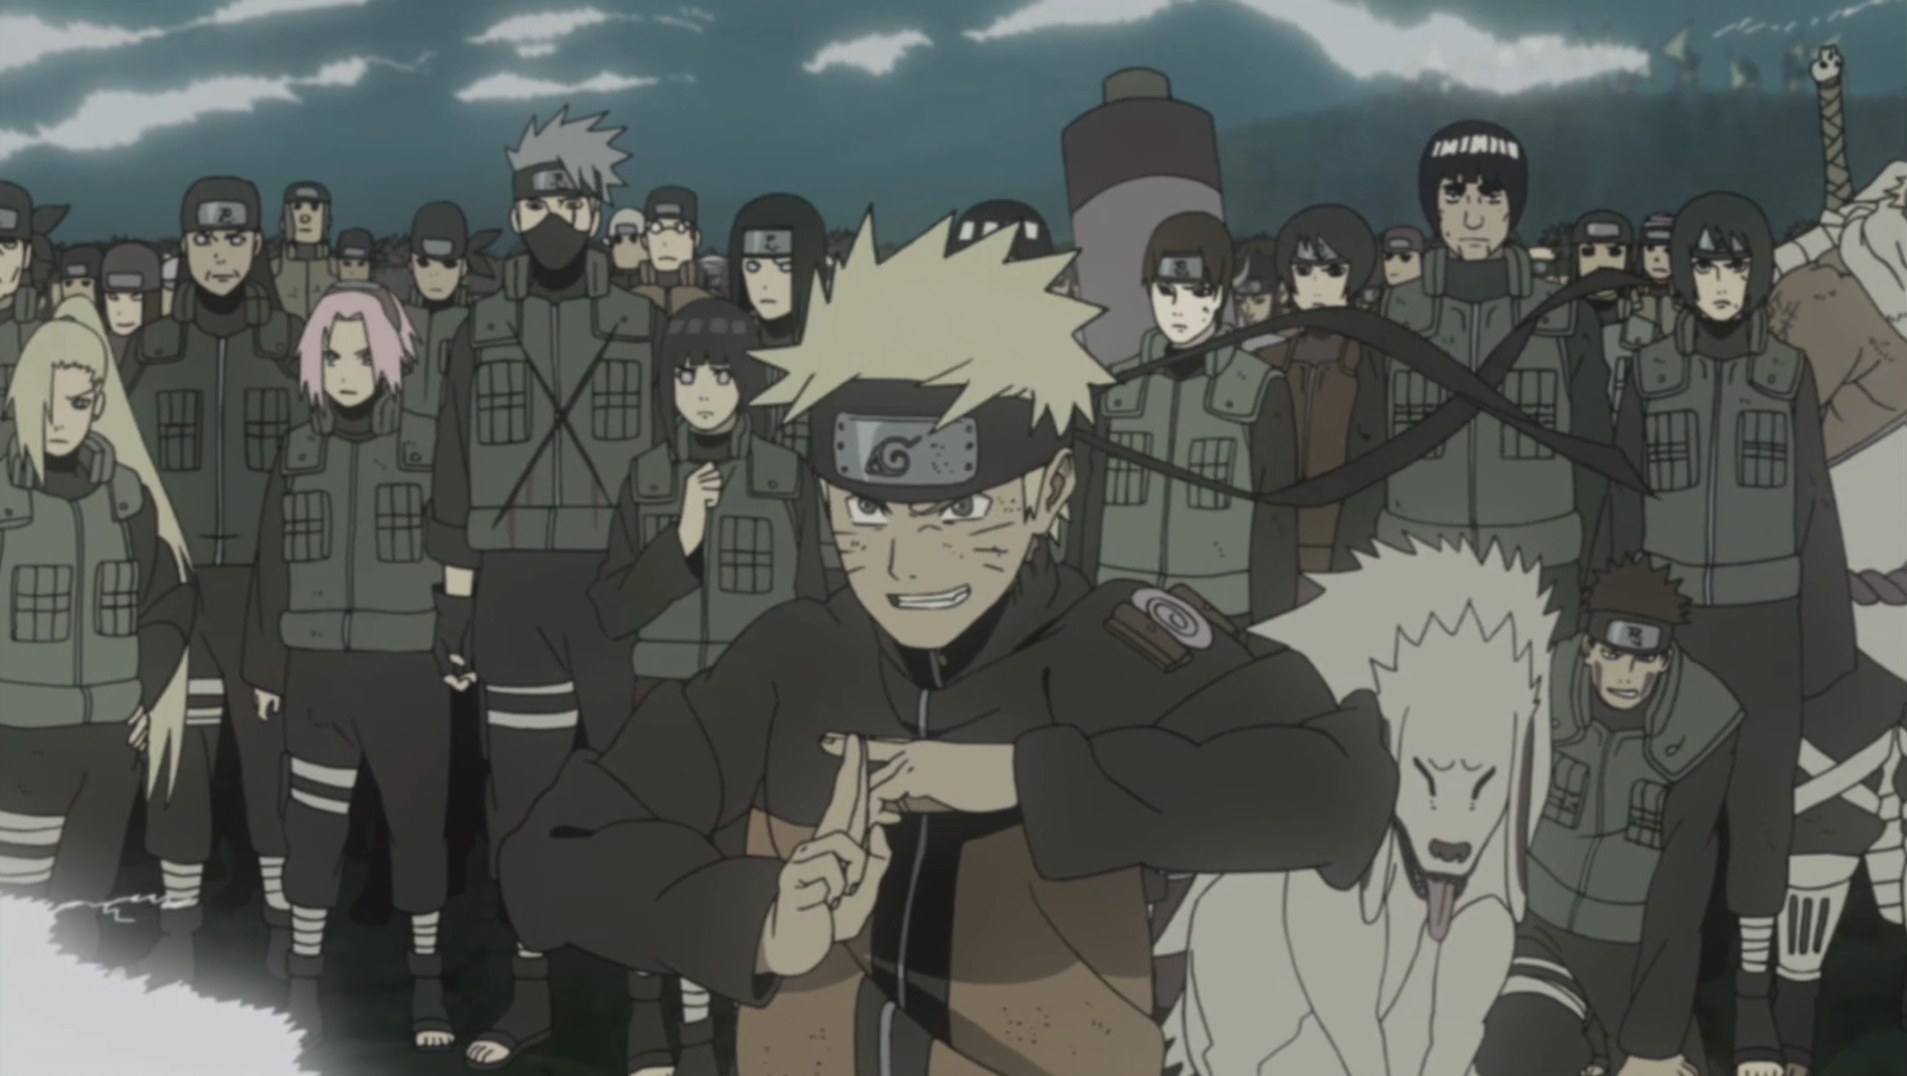 The Allied Shinobi Forces Technique | Narutopedia | FANDOM powered by Wikia